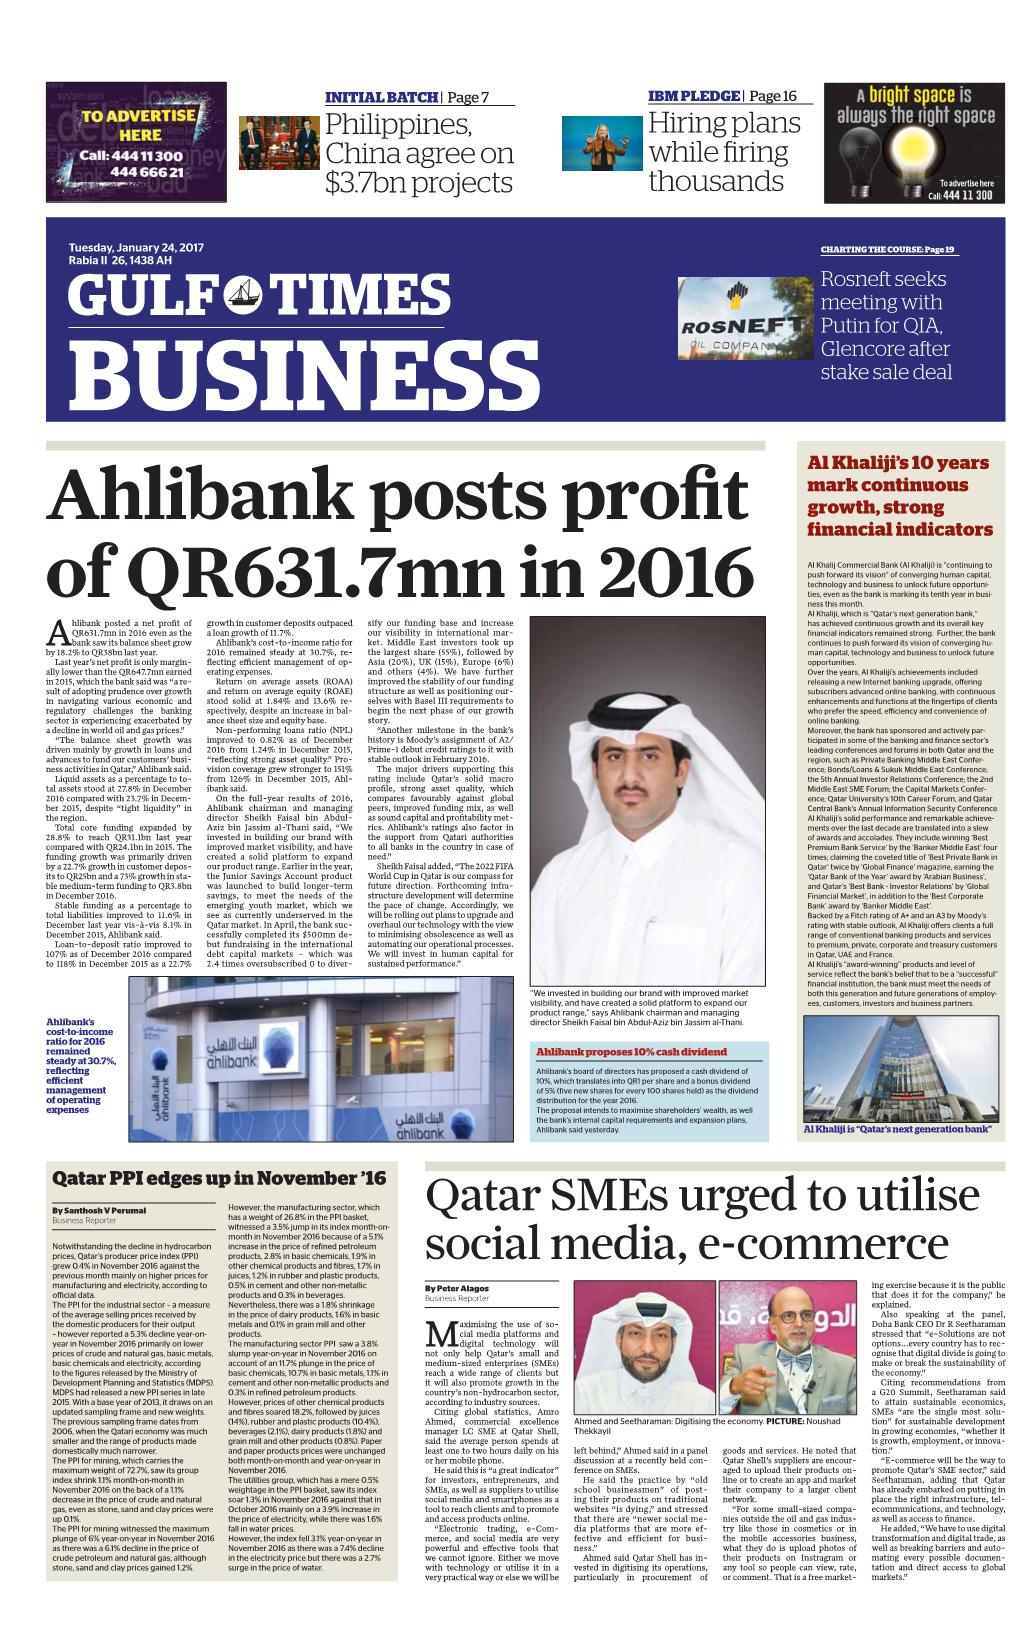 Al Khaliji's 10 Years Mark Continuous Growth, Strong Financial